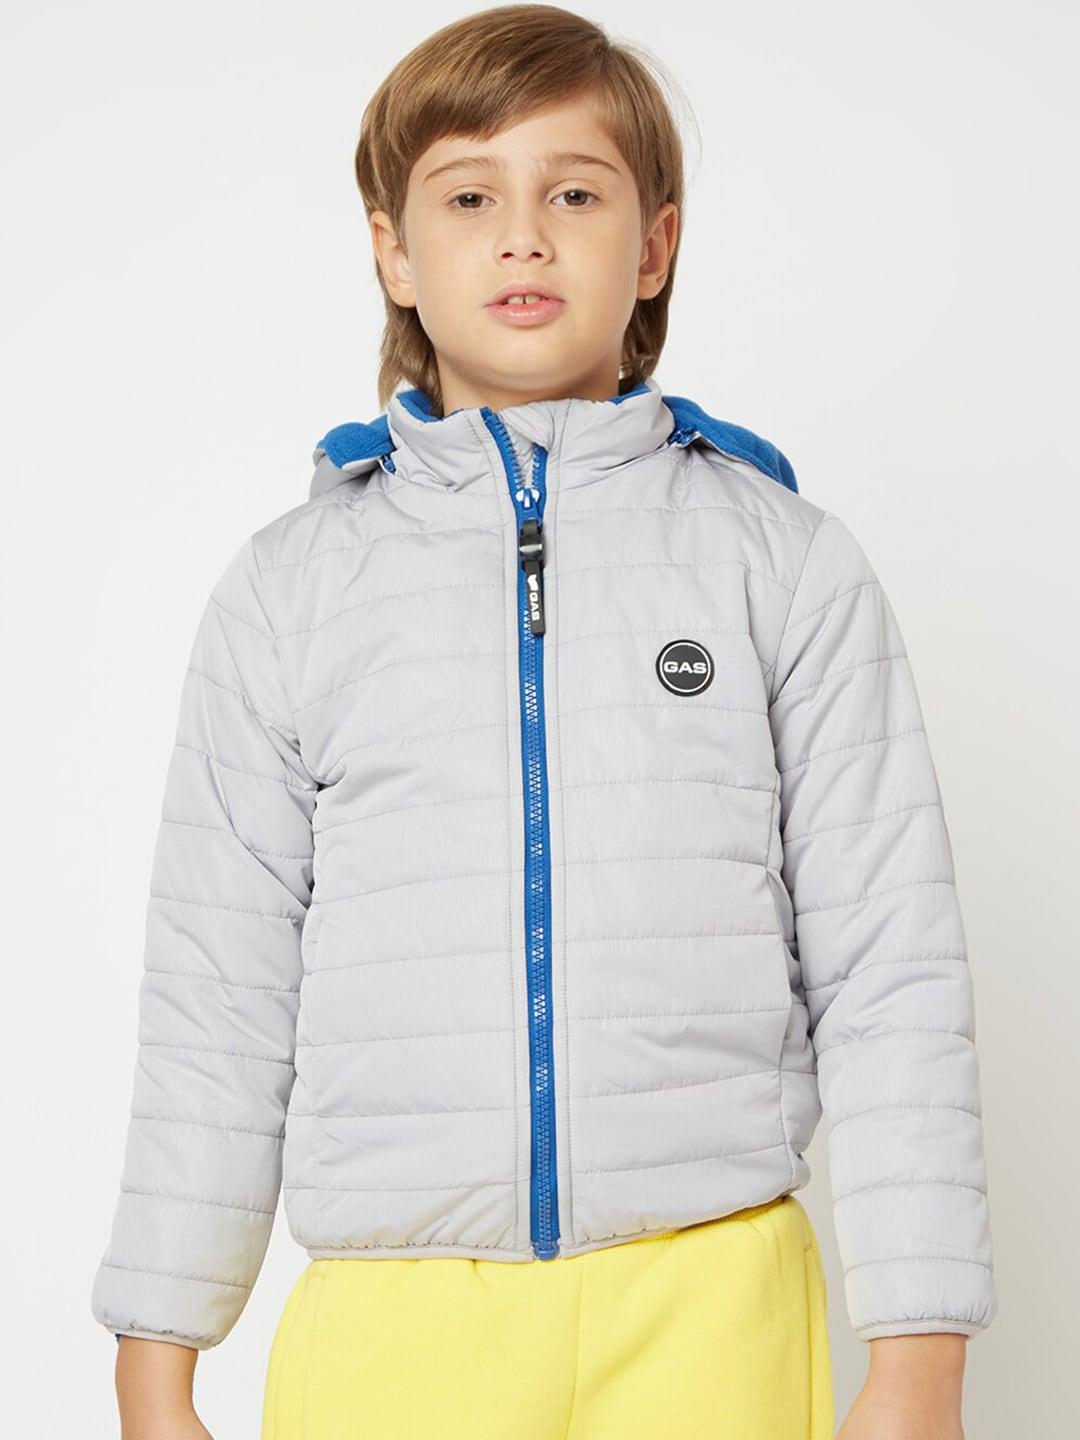 gas boys hooded tailored jacket